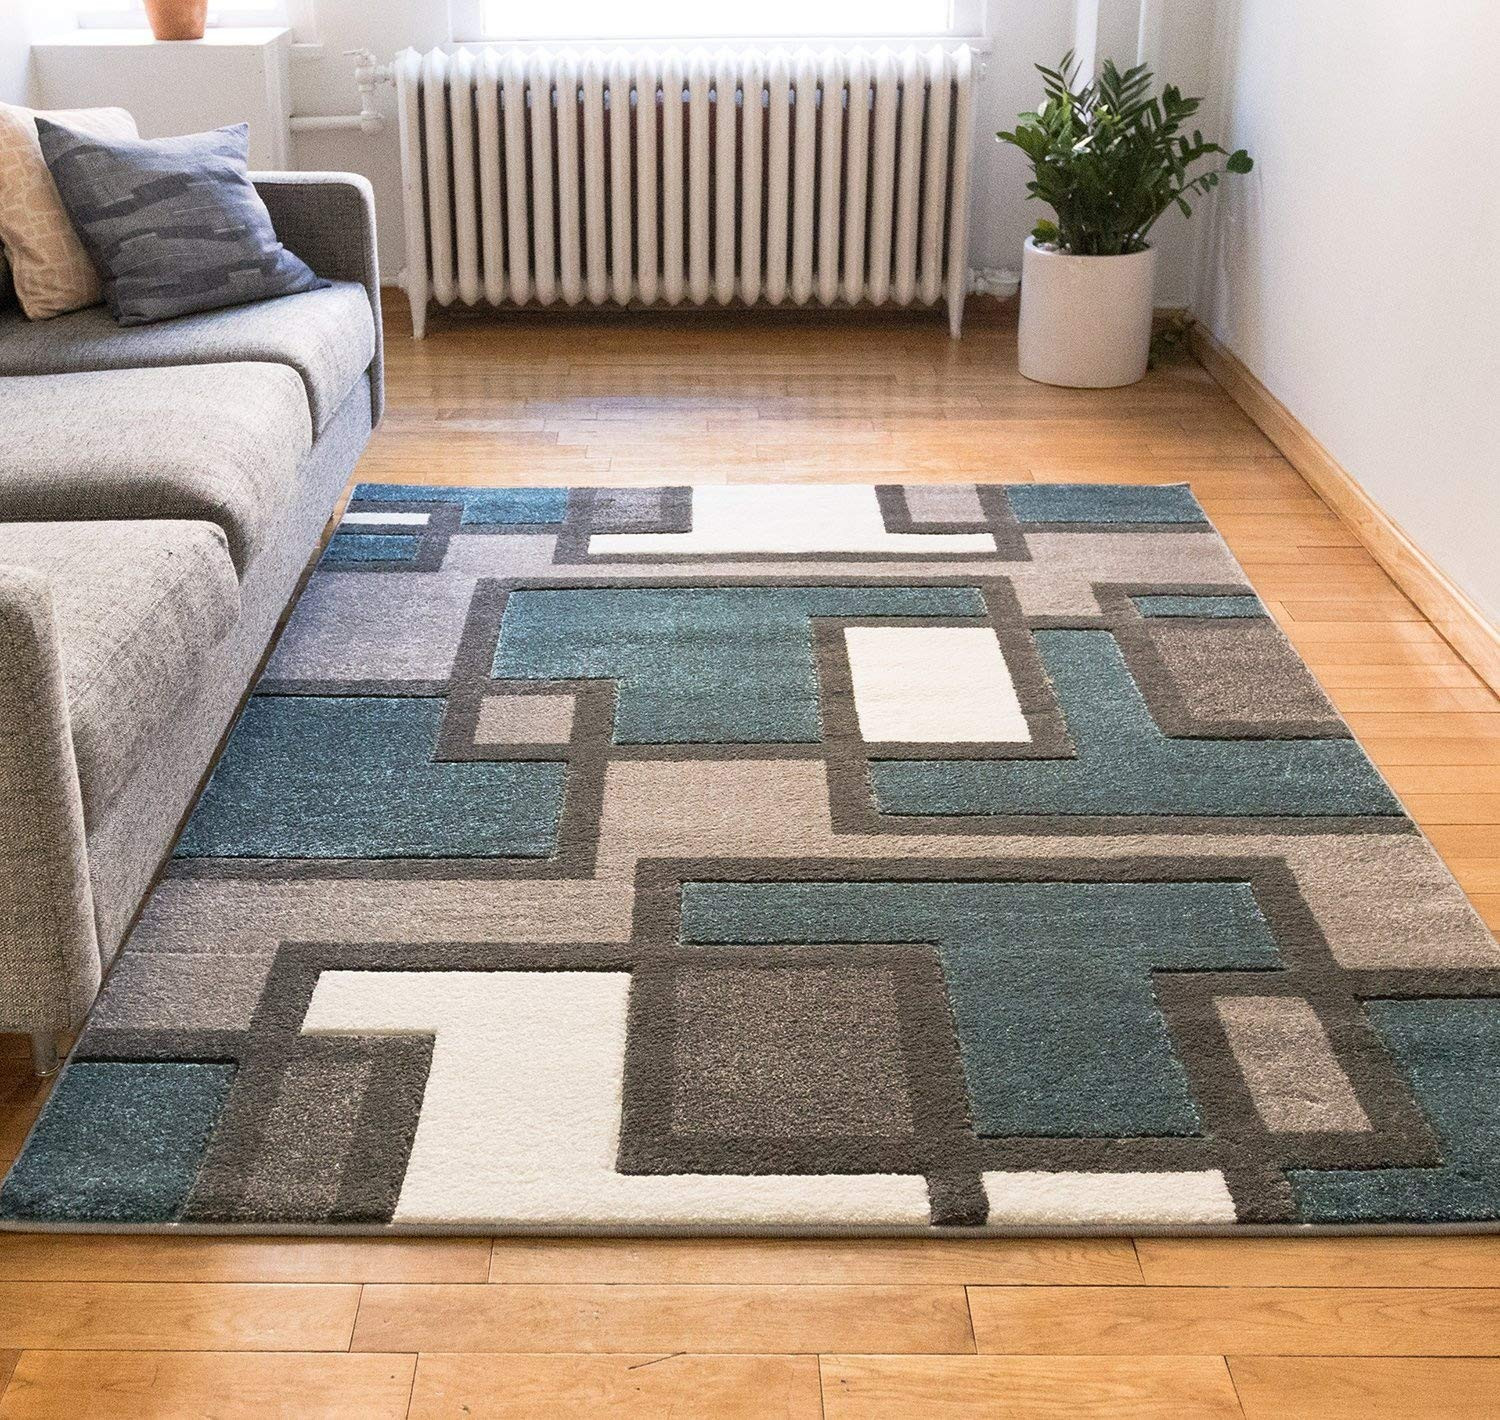 5X7 Living Room Rugs
 Accent Rug for Living Room Amazon